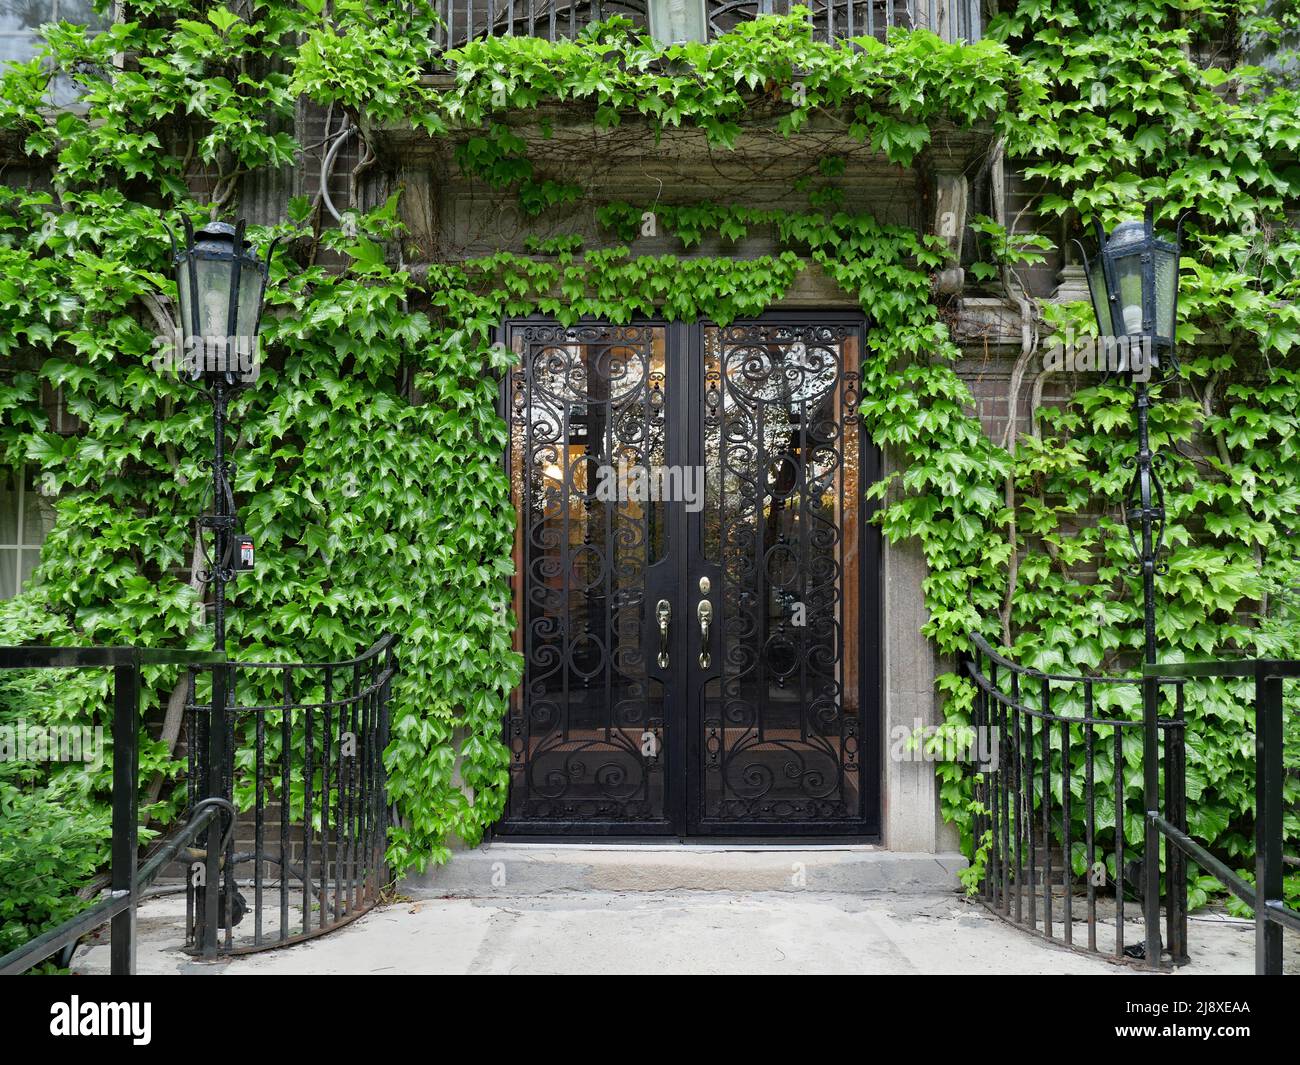 Entrance to ivy covered building Stock Photo